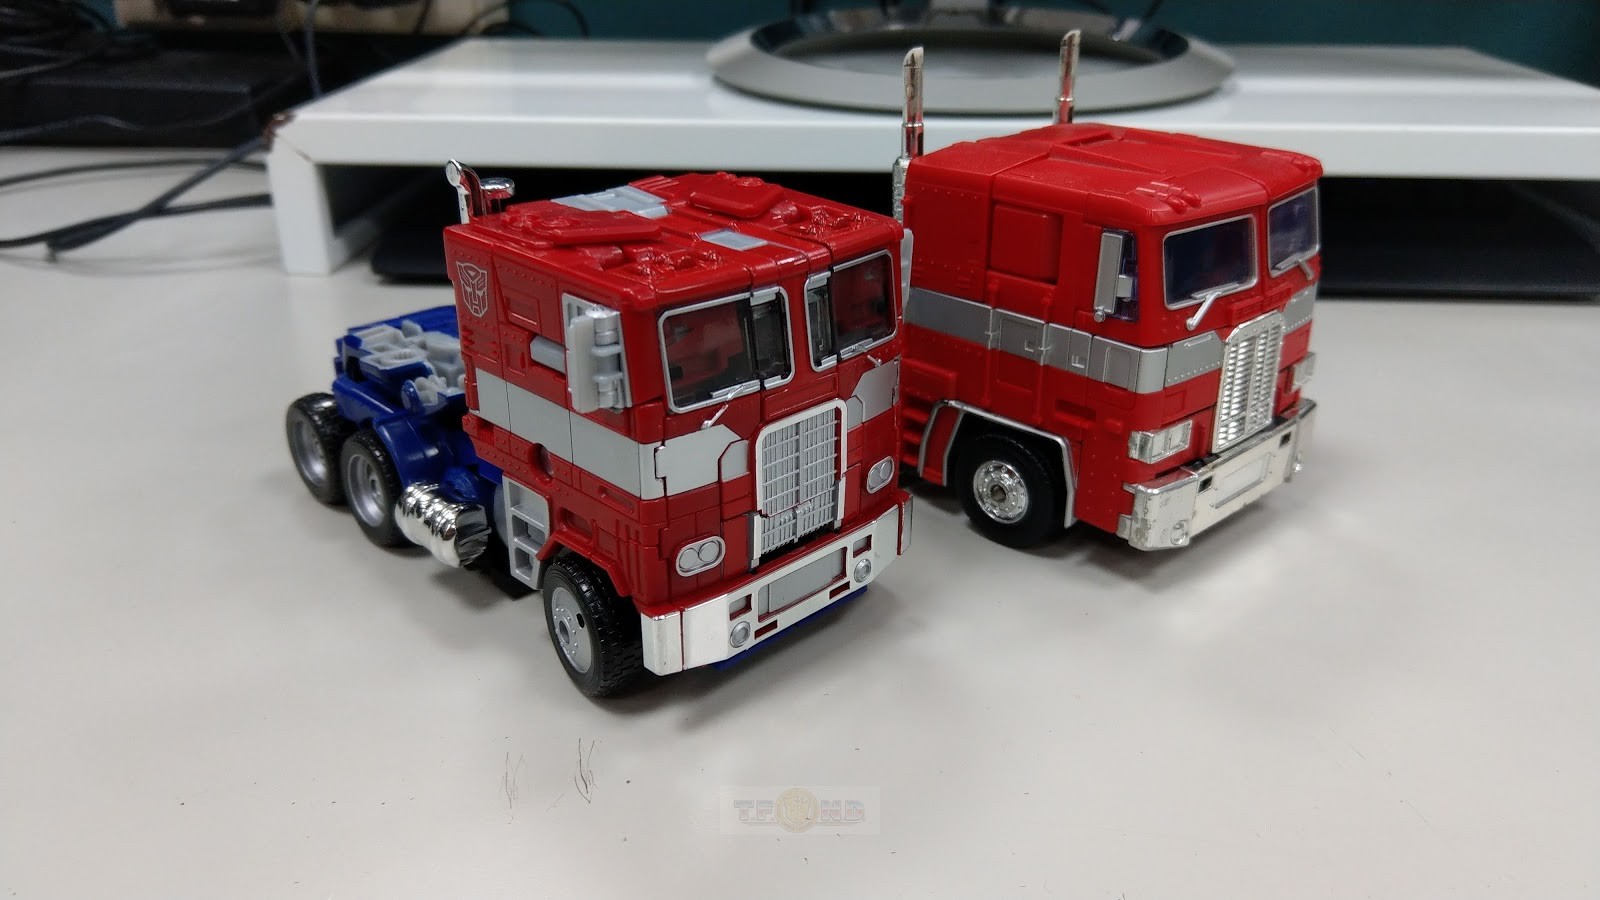 Transformers News: In-Hand Images of Takara Tomy BB-02 Legendary Optimus Prime